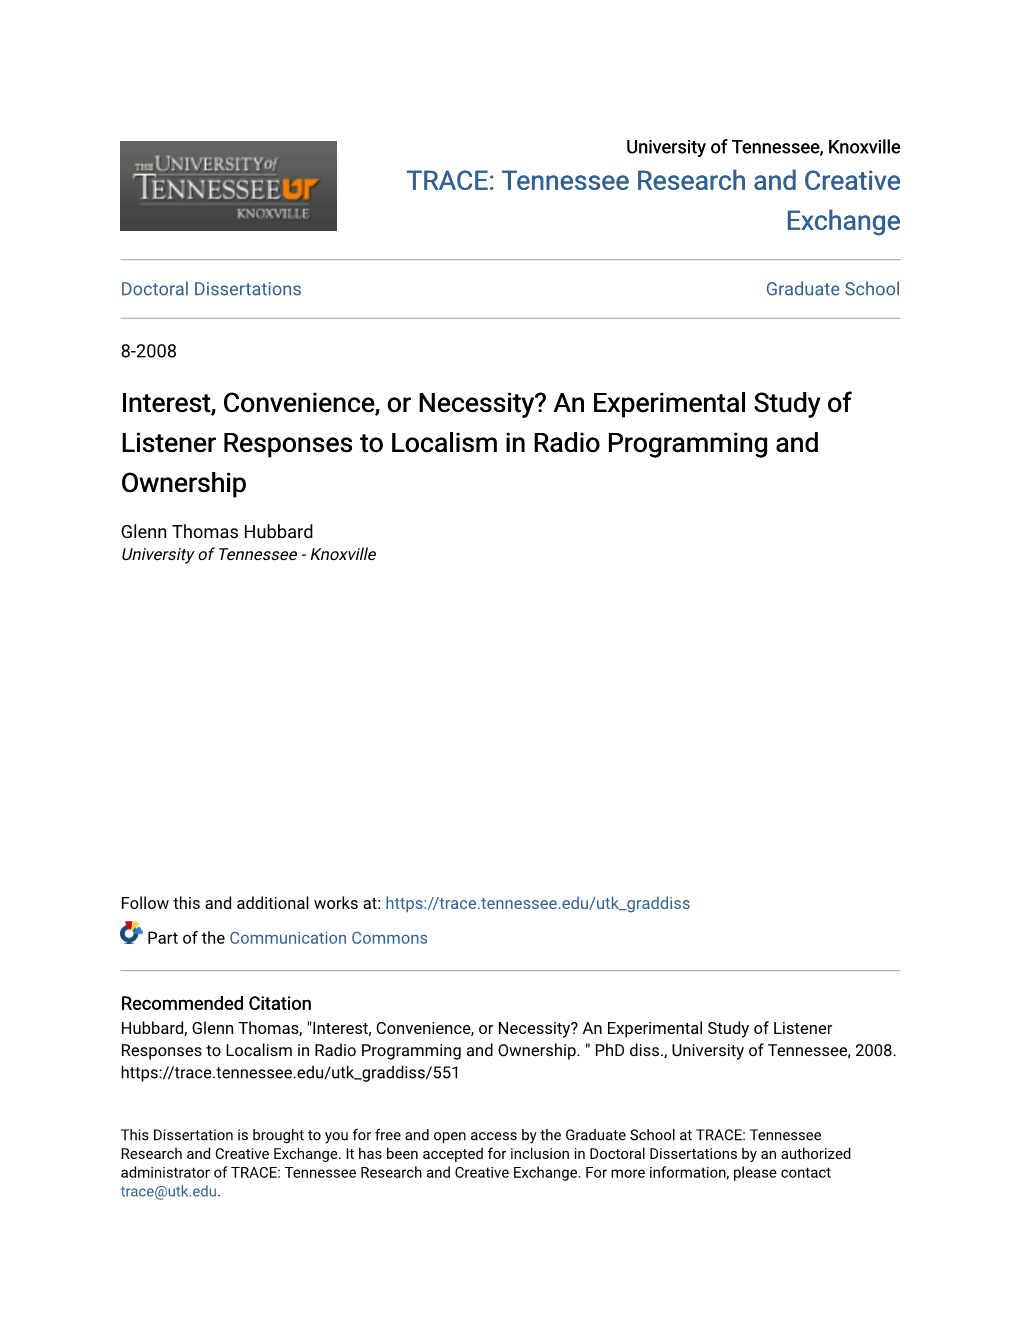 An Experimental Study of Listener Responses to Localism in Radio Programming and Ownership